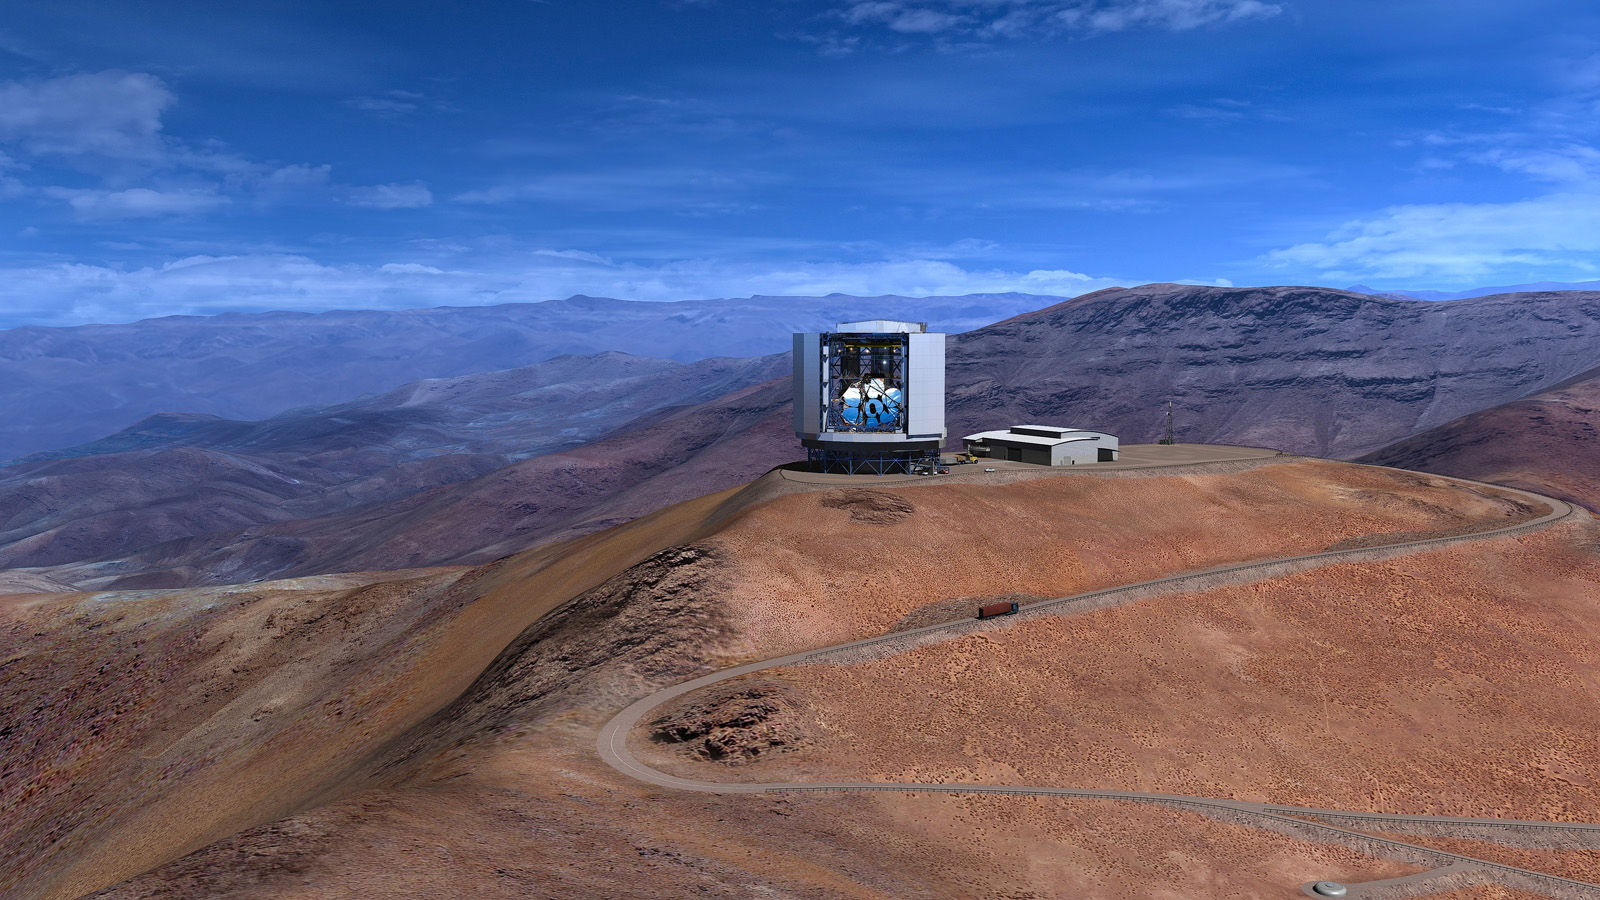 The Giant Magellan Telescope is under construction on a remote mountain top and is projected to begin commissioning in 2023. (Courtesy GMTO Corporation)